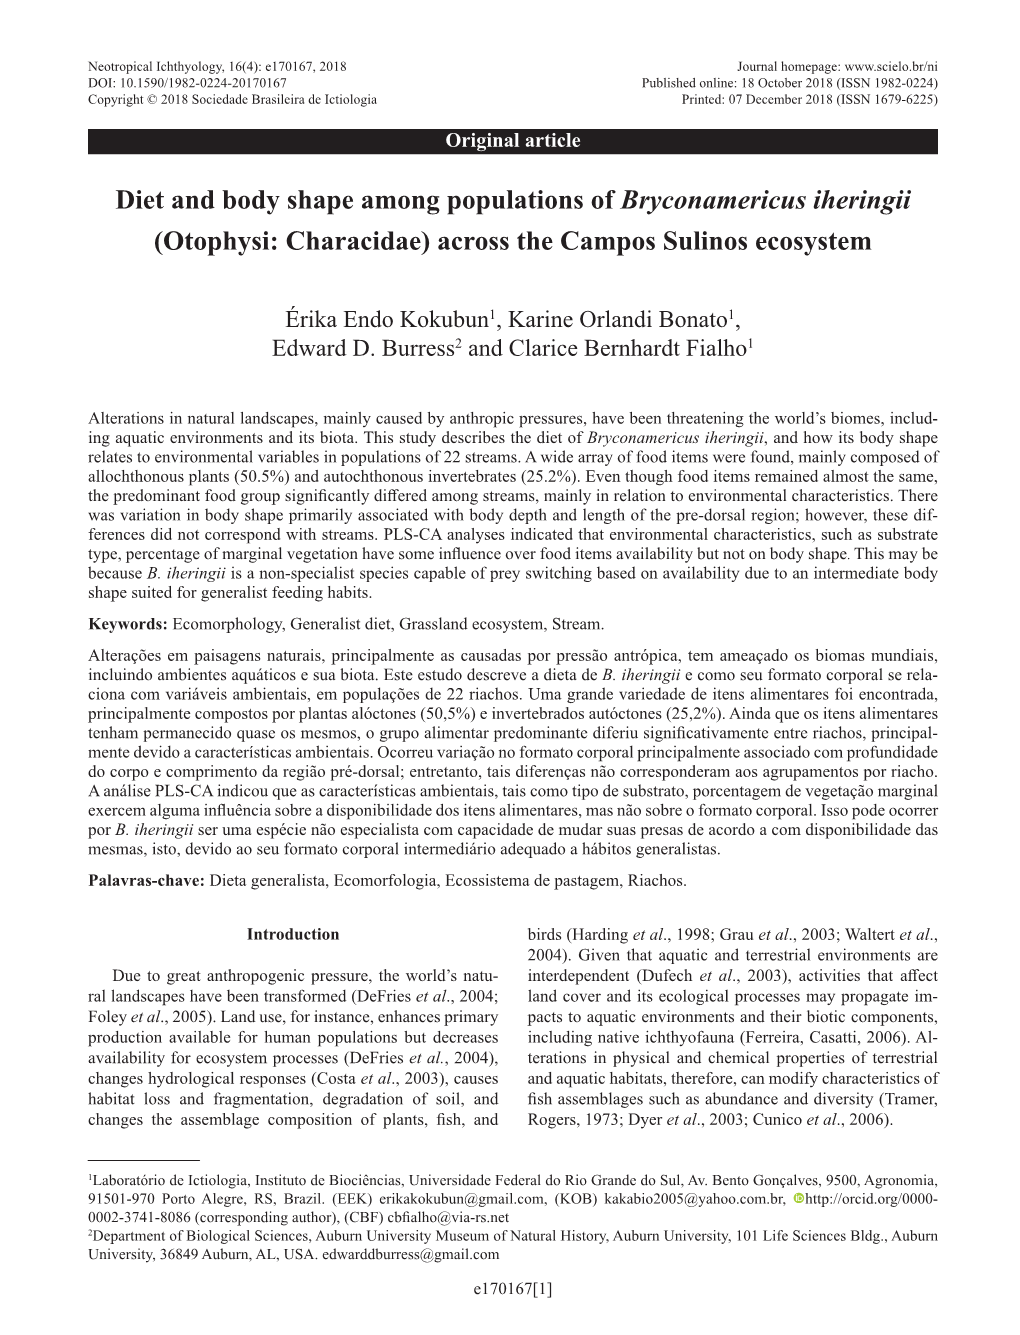 Diet and Body Shape Among Populations of Bryconamericus Iheringii (Otophysi: Characidae) Across the Campos Sulinos Ecosystem